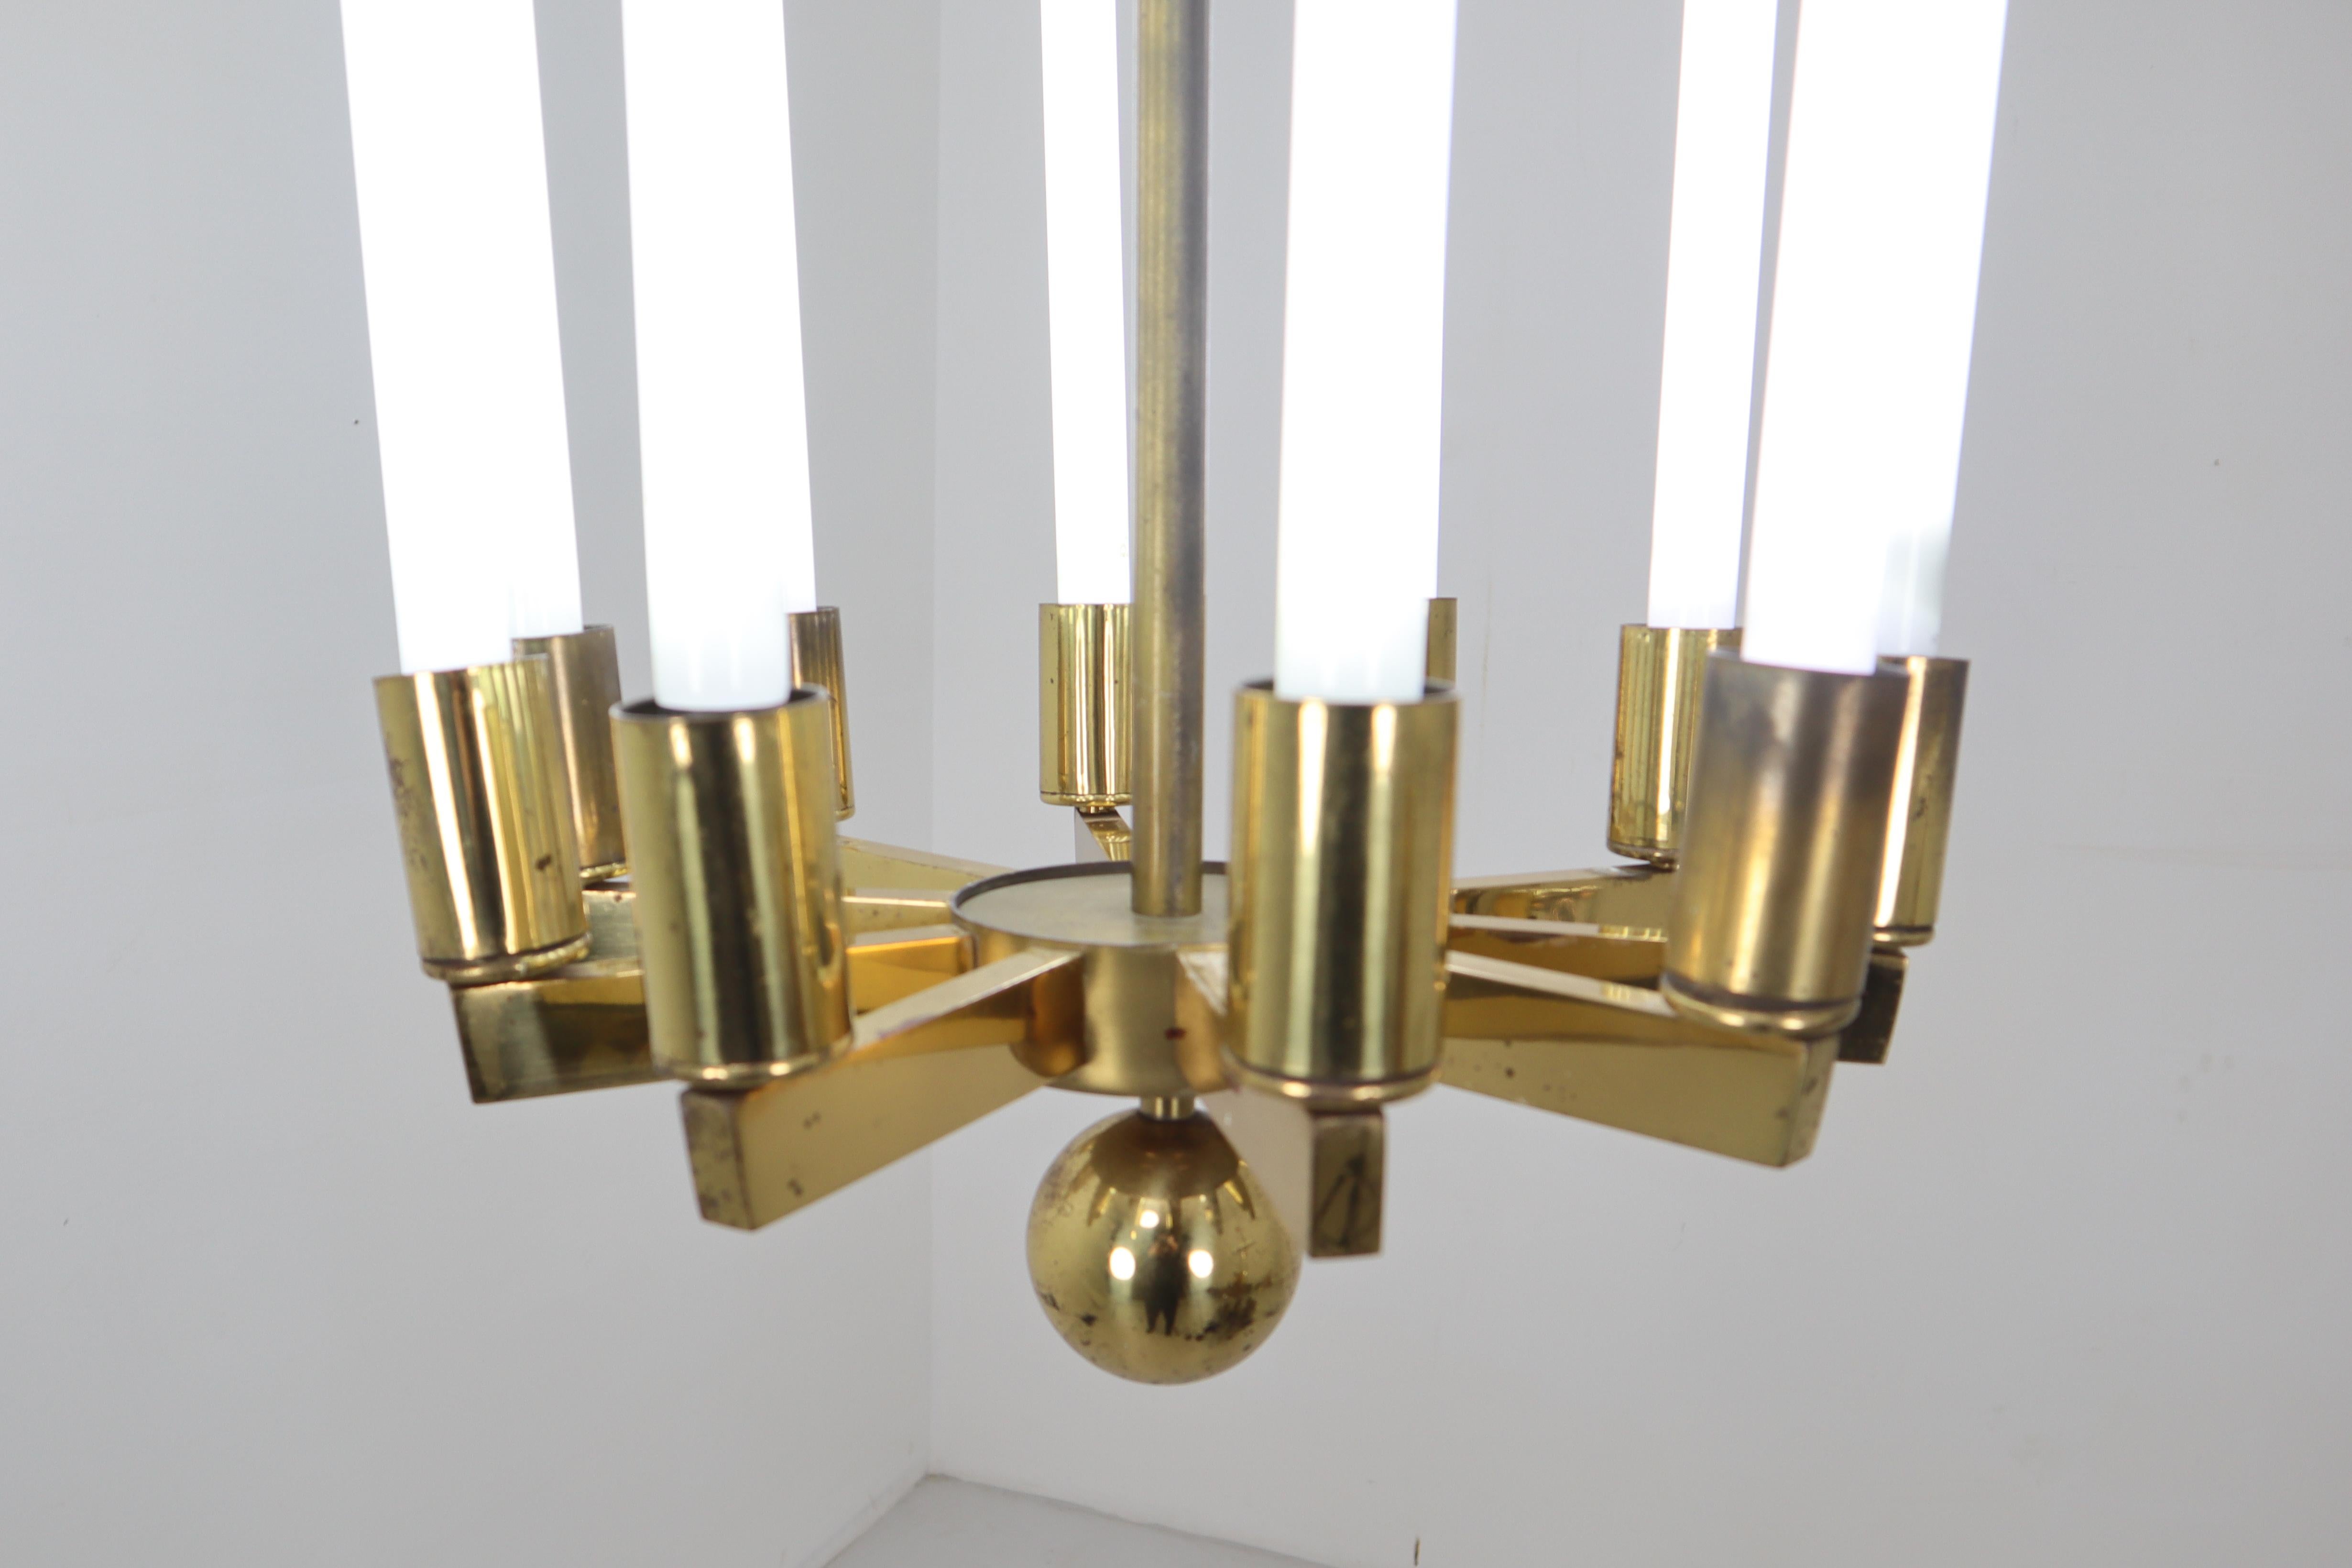 Extra large brass chandelier by Kaiser & Co., made in Germany, circa 1940s. In the fashion of Art Deco transitioning into modern and Bauhaus. Patinated brass frame supports ten fluorescent tubes. It makes a beautiful ceiling pendant light for spaces